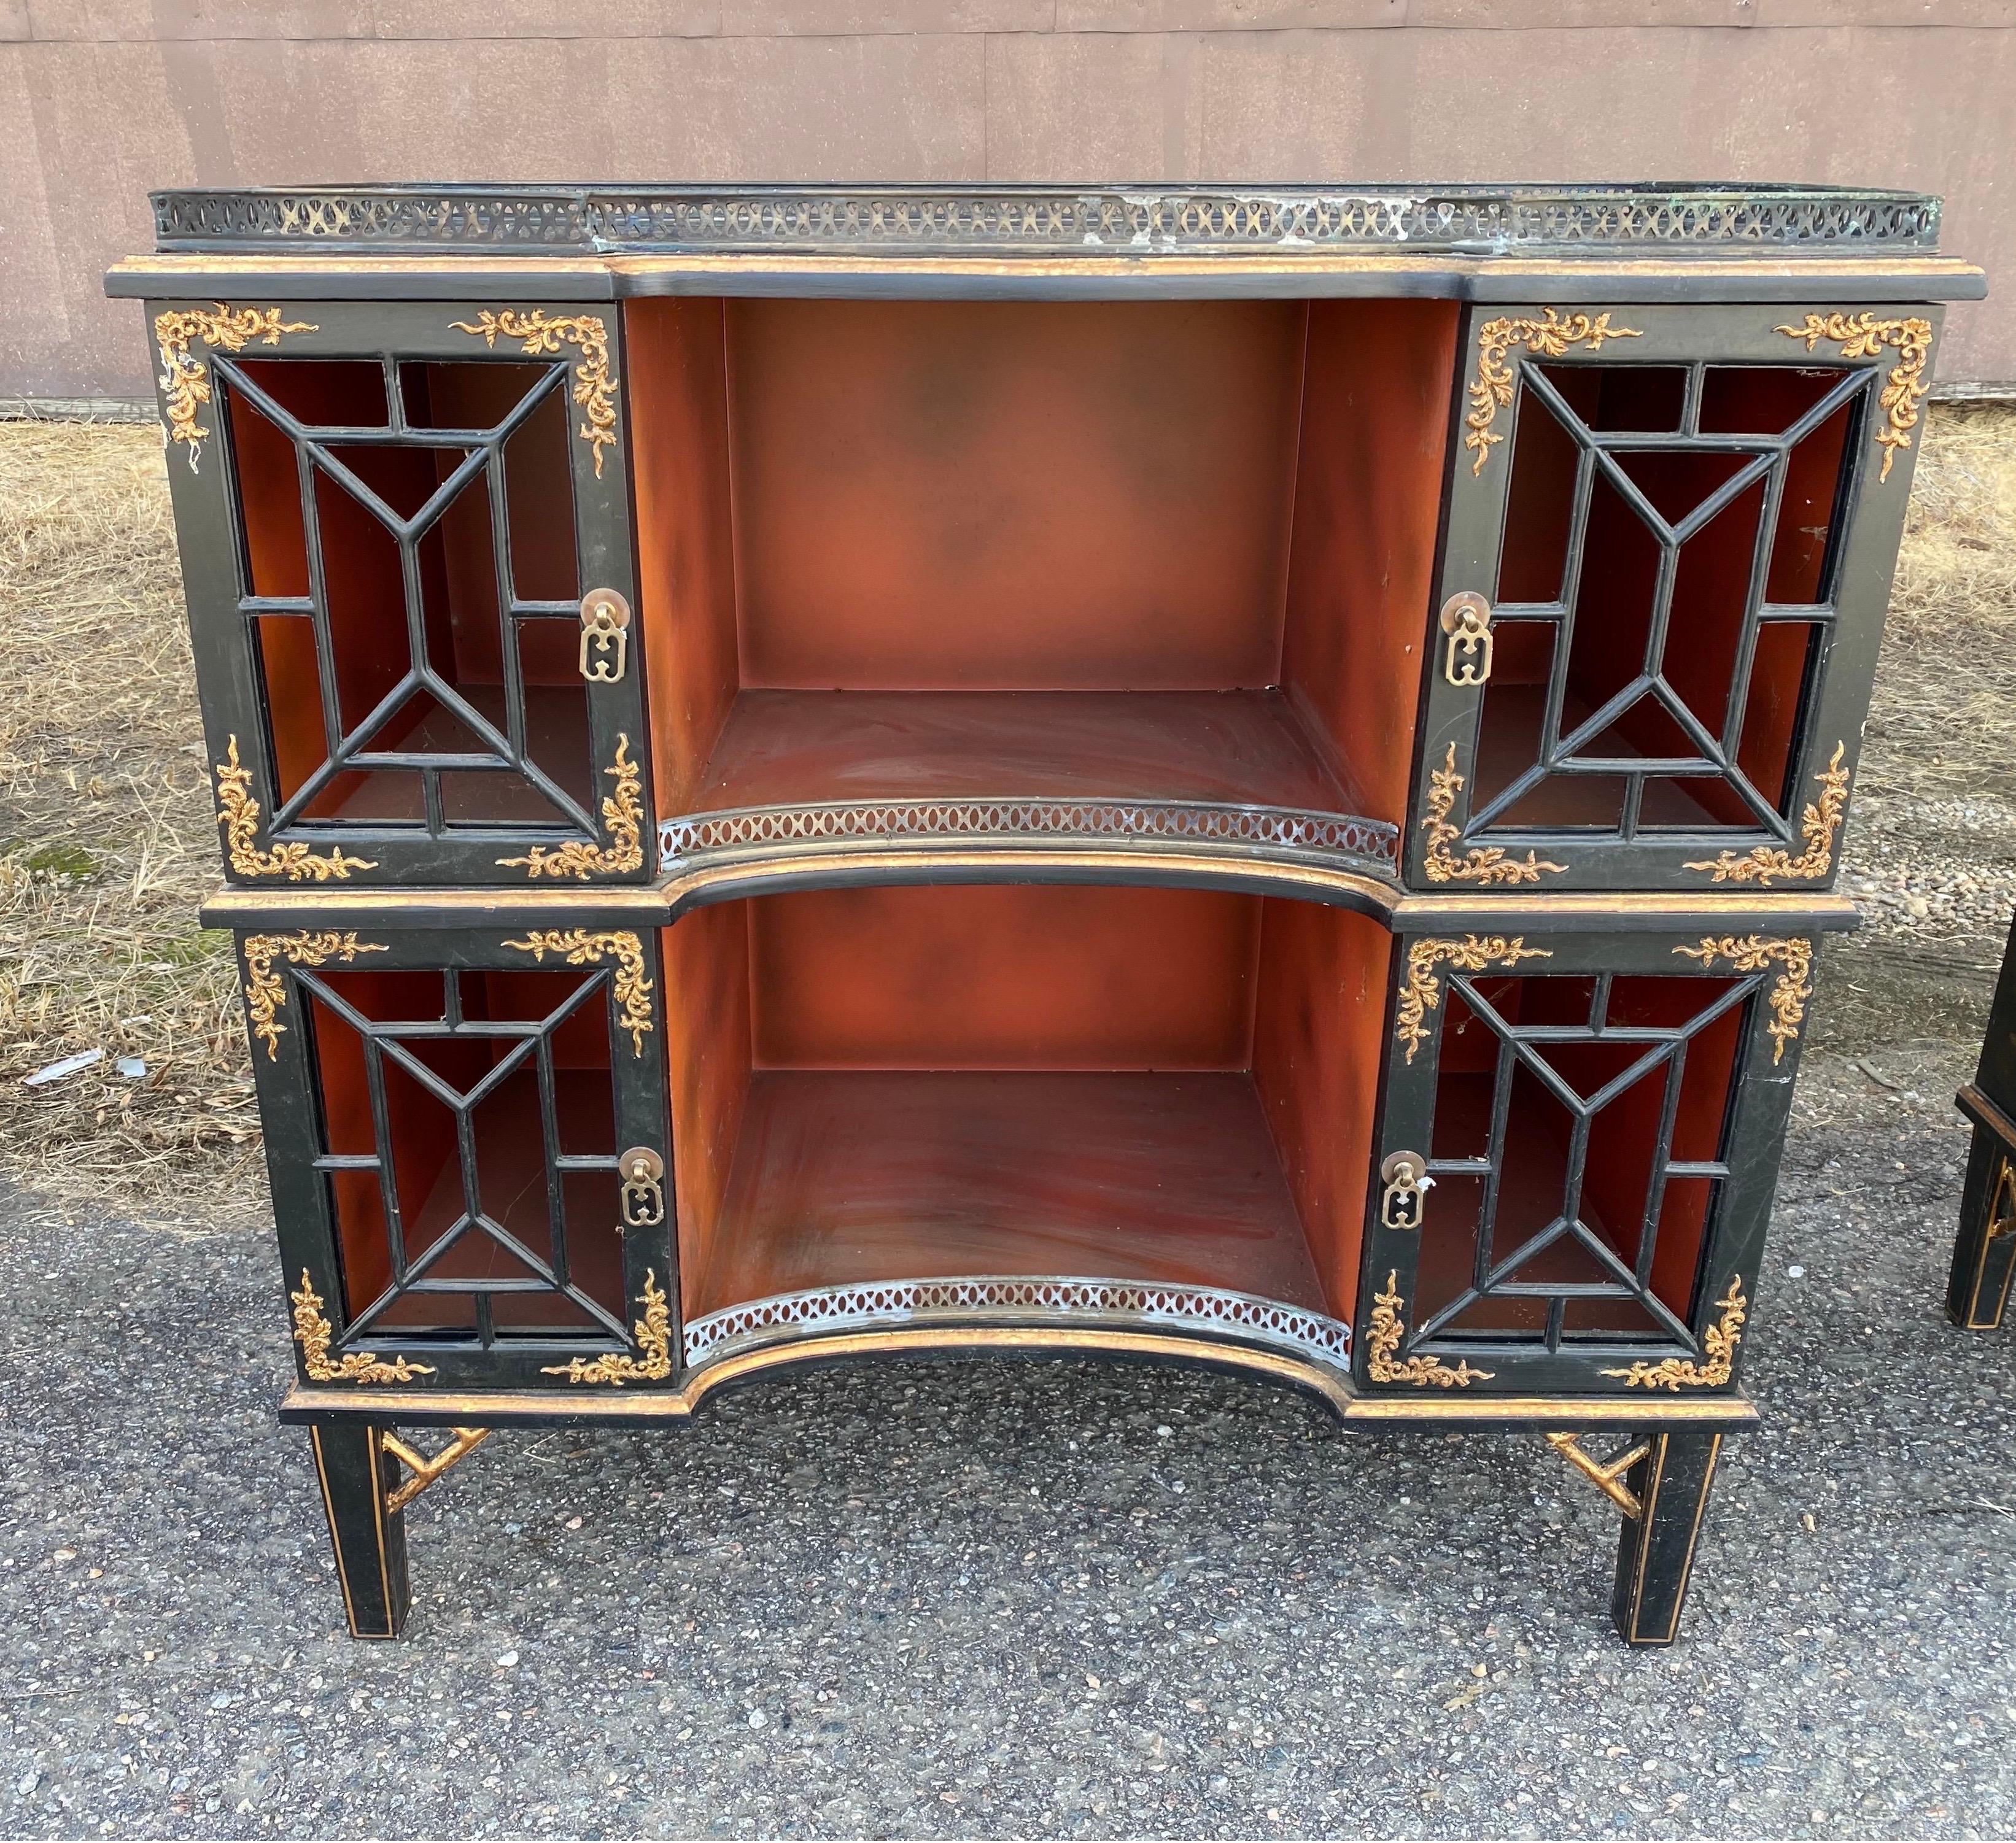 Great pair of vintage chinoiserie cabinets. Great quality, raised chinoiserie decoration. Height is perfect to use for a pair of tables or pair of bedside cabinets.